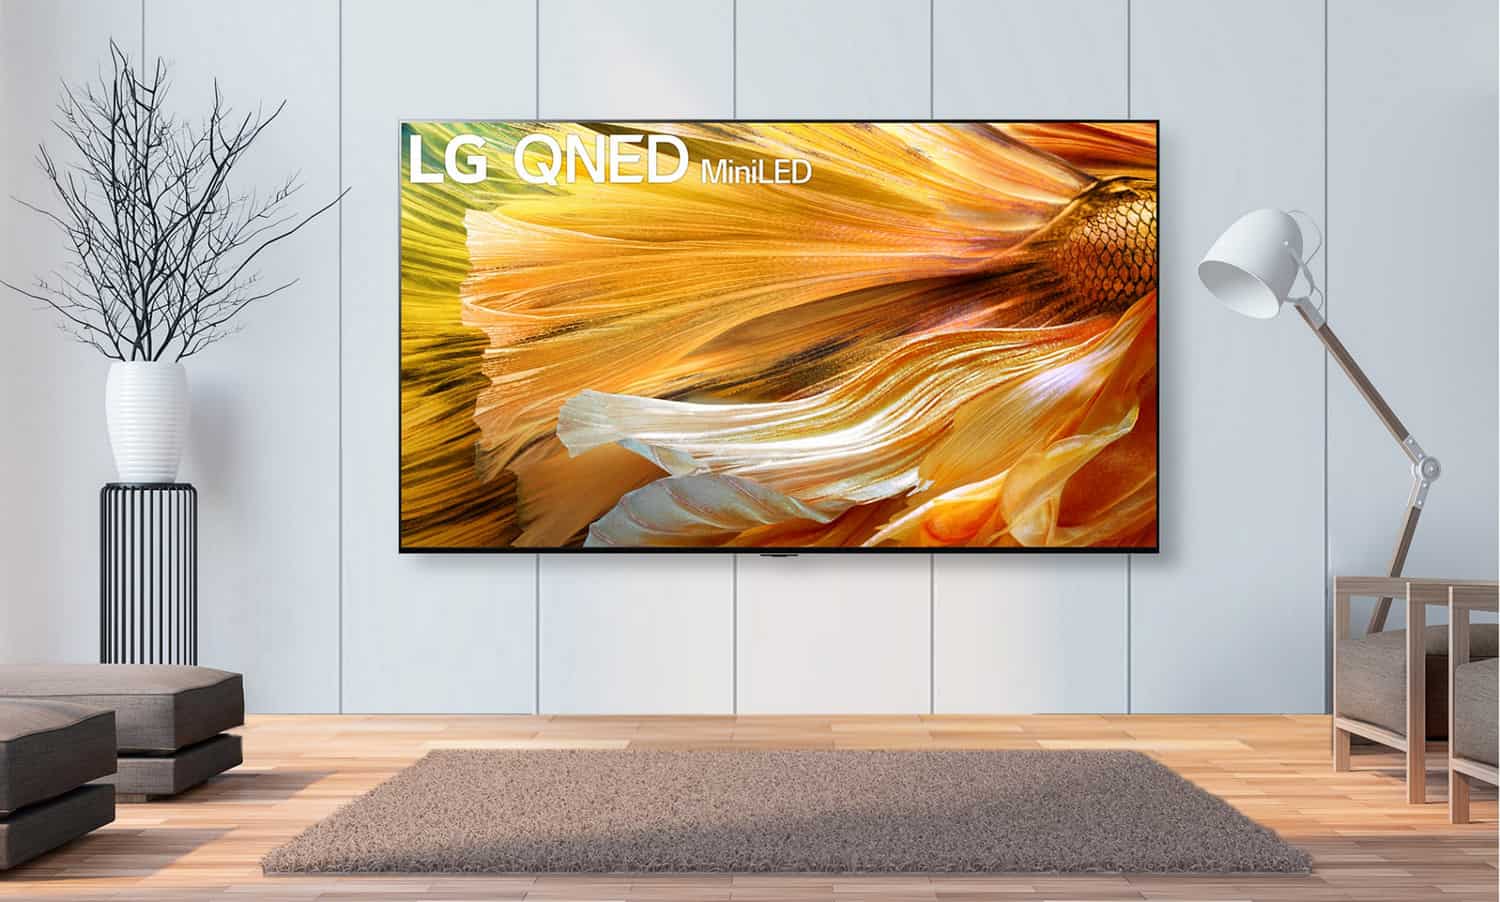 LG QNED90 TV